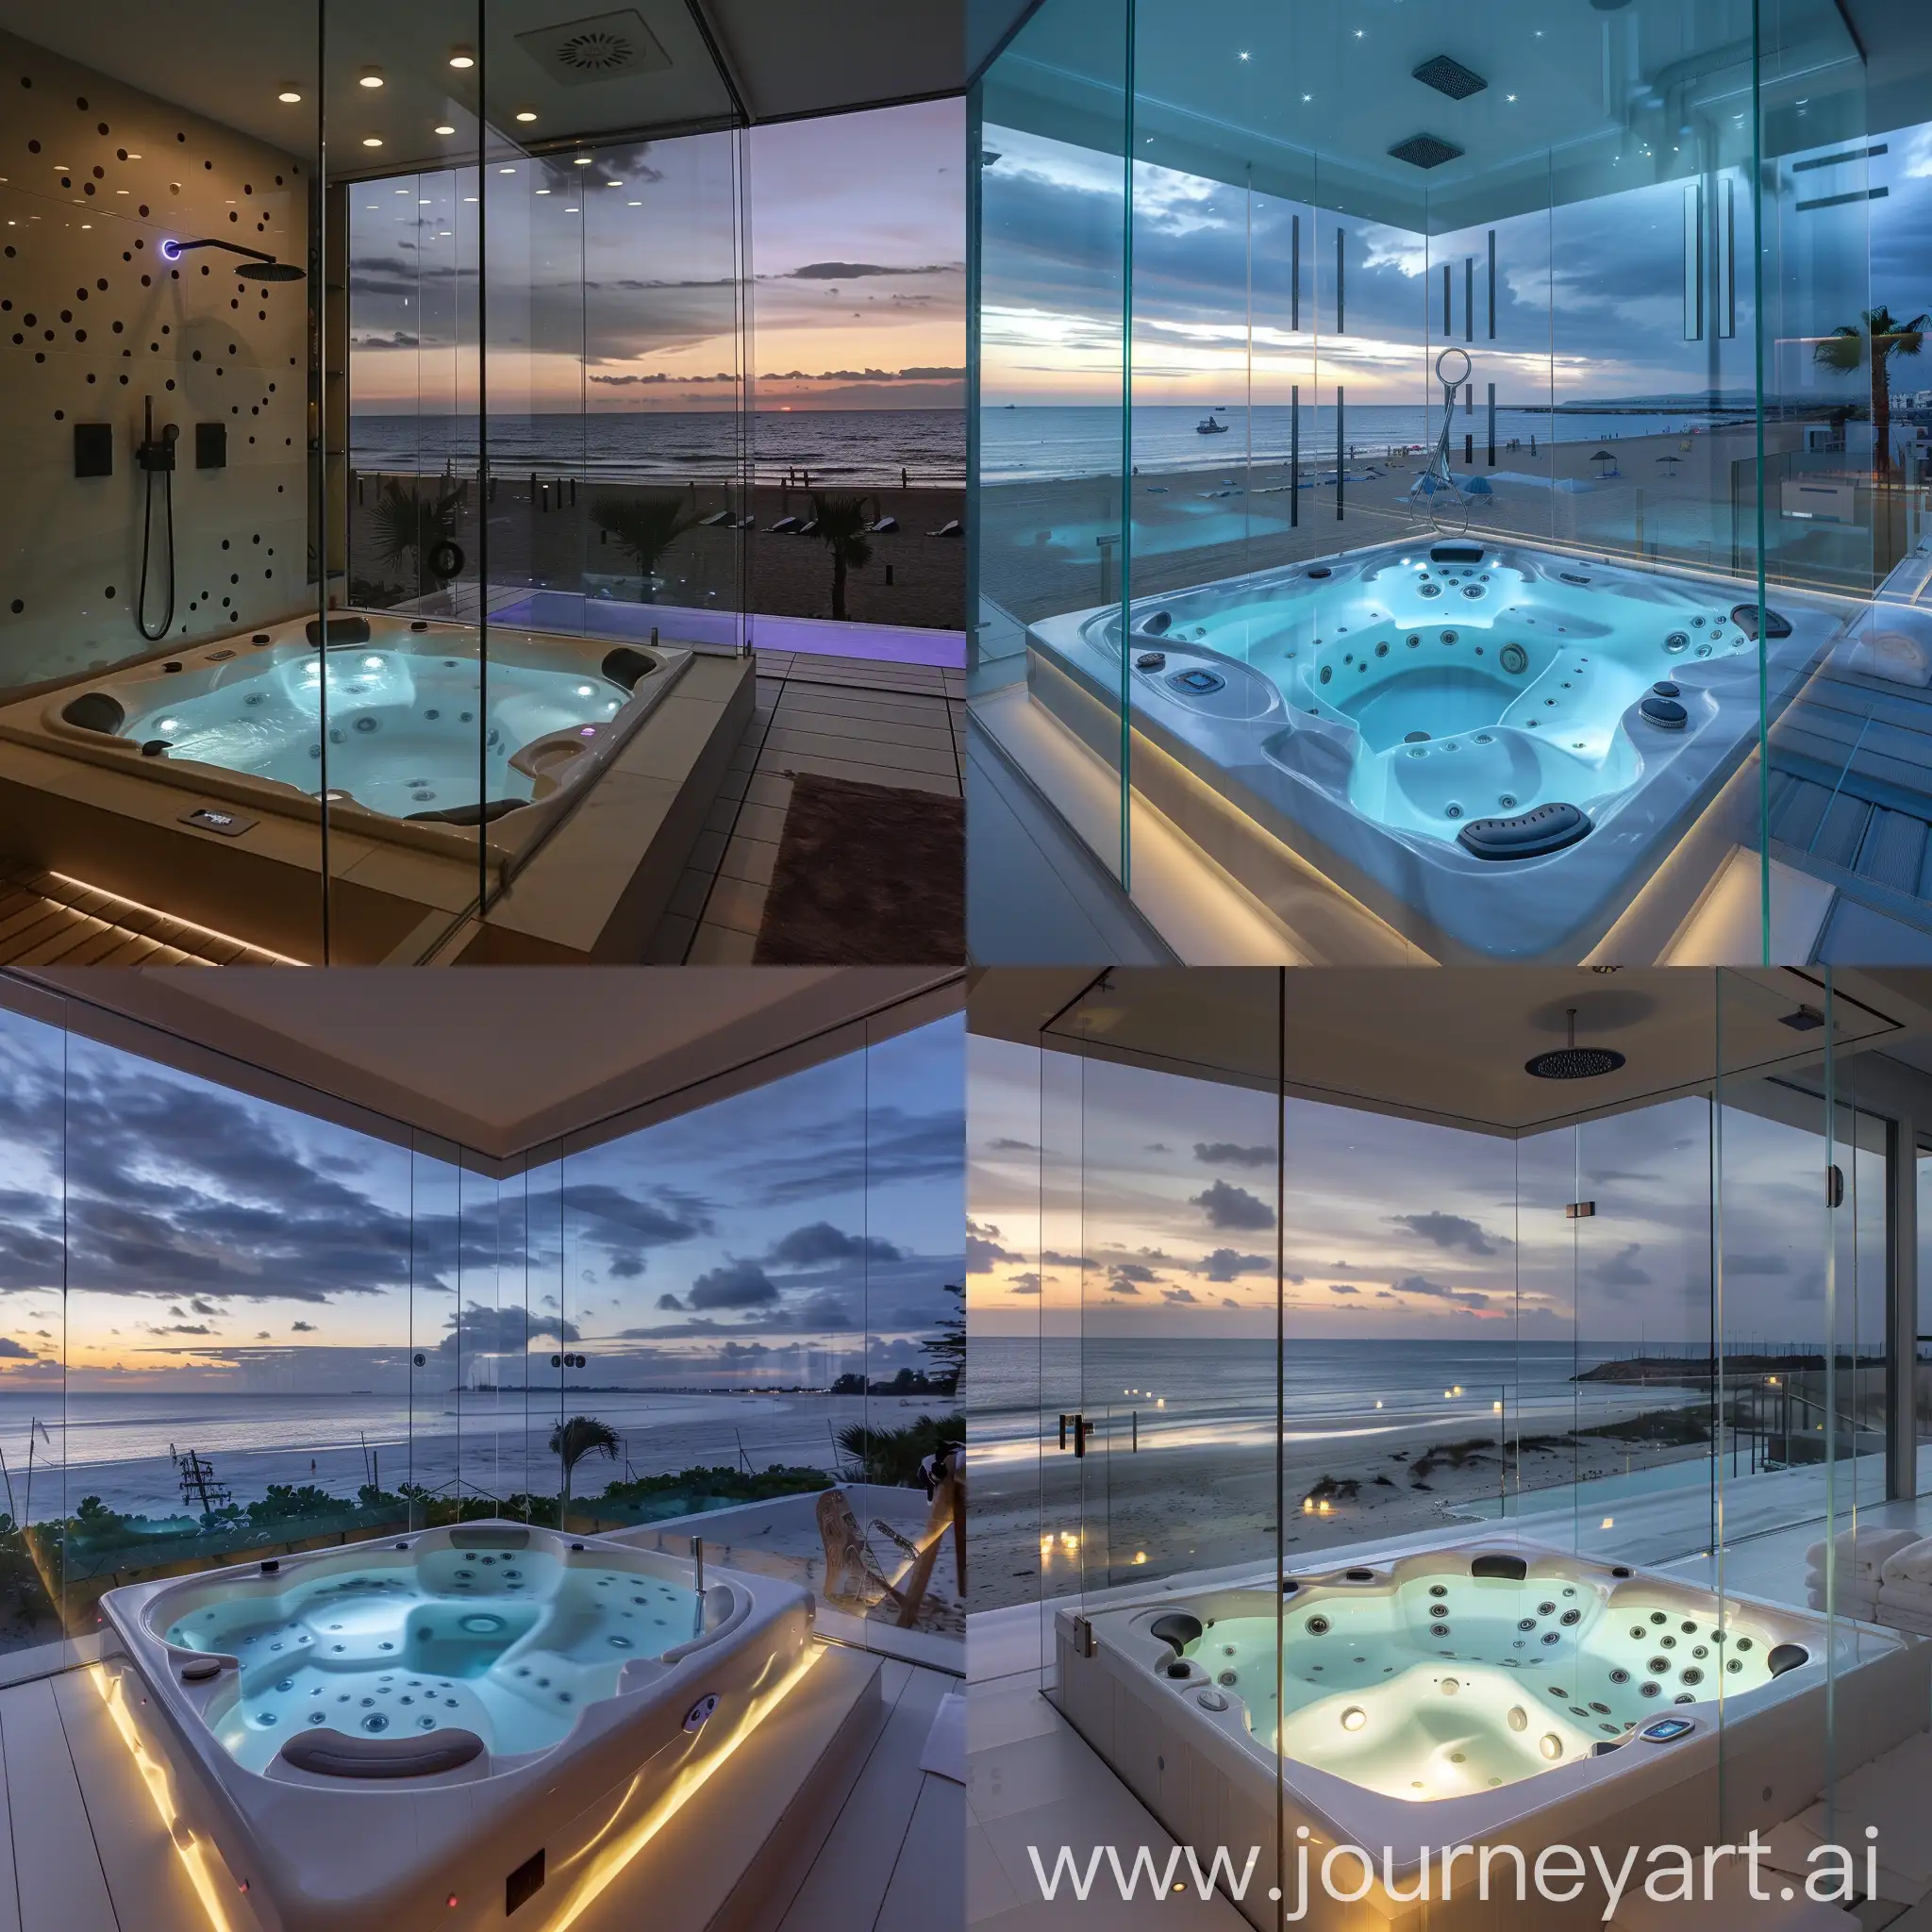 A glass bathroom with a jacuzzi, soft lighting, complete decor, facing the sea and the beach with partly cloudy weather at the end of the day, real photo